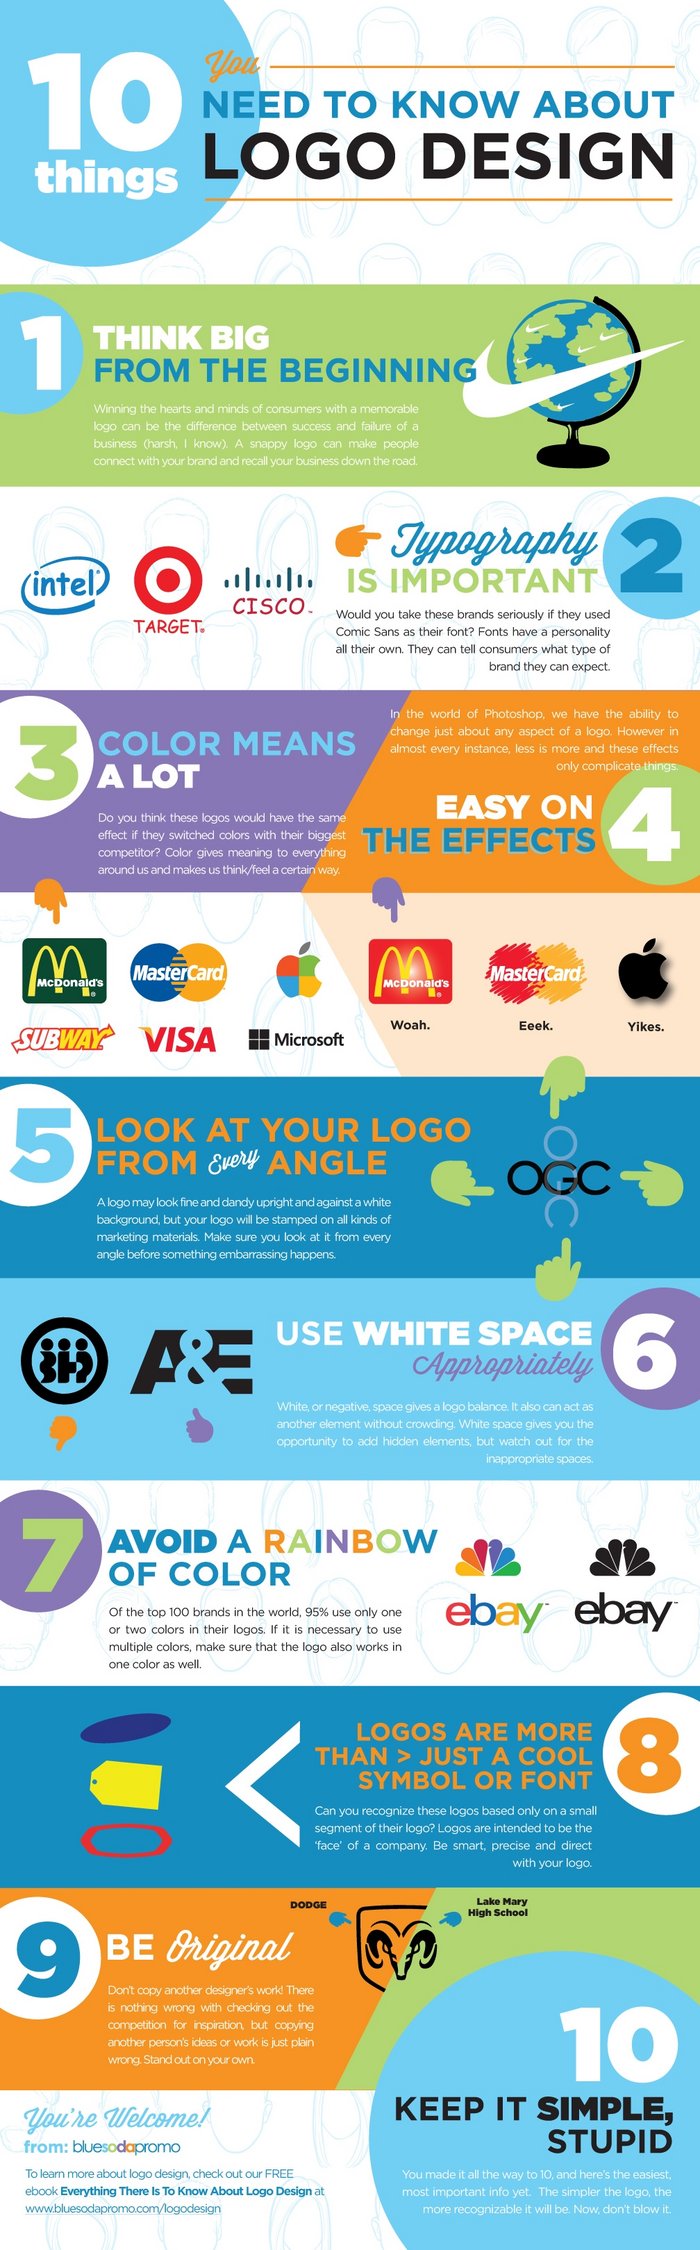 10 things you need to know about logo design